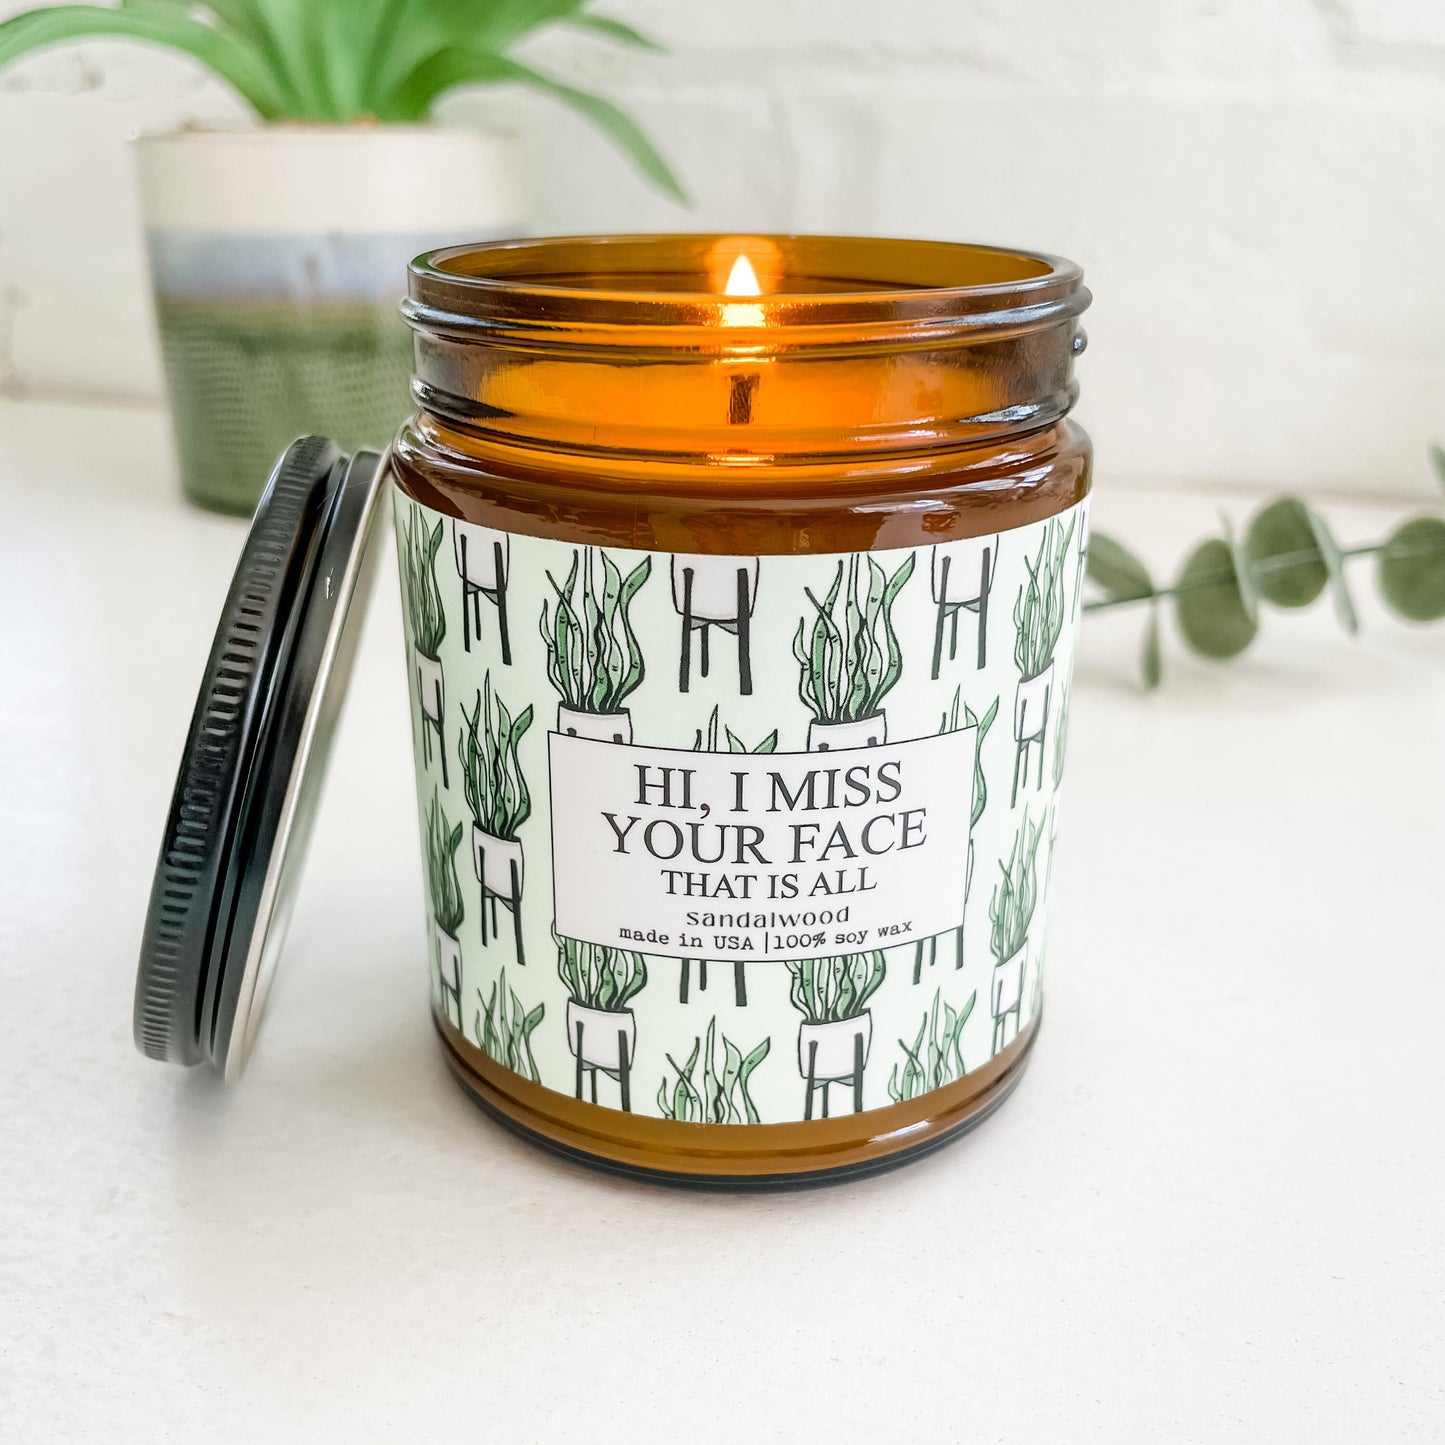 Hi I Miss Your Face That Is All - 9oz Glass Jar Soy Candle - Sandalwood